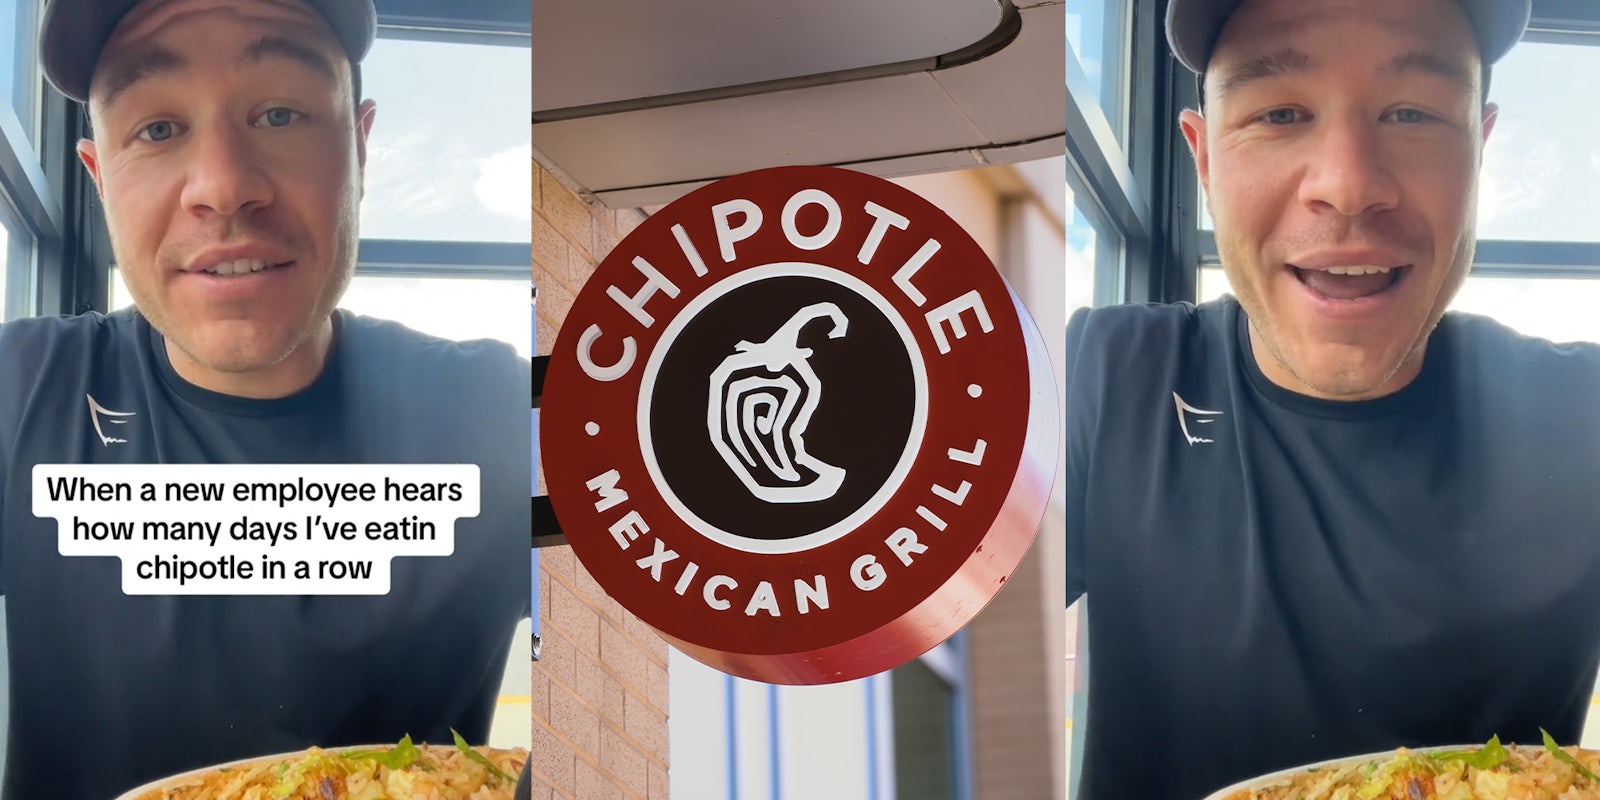 Chipotle customer tells new employee that he's eaten there for 624 days in a row